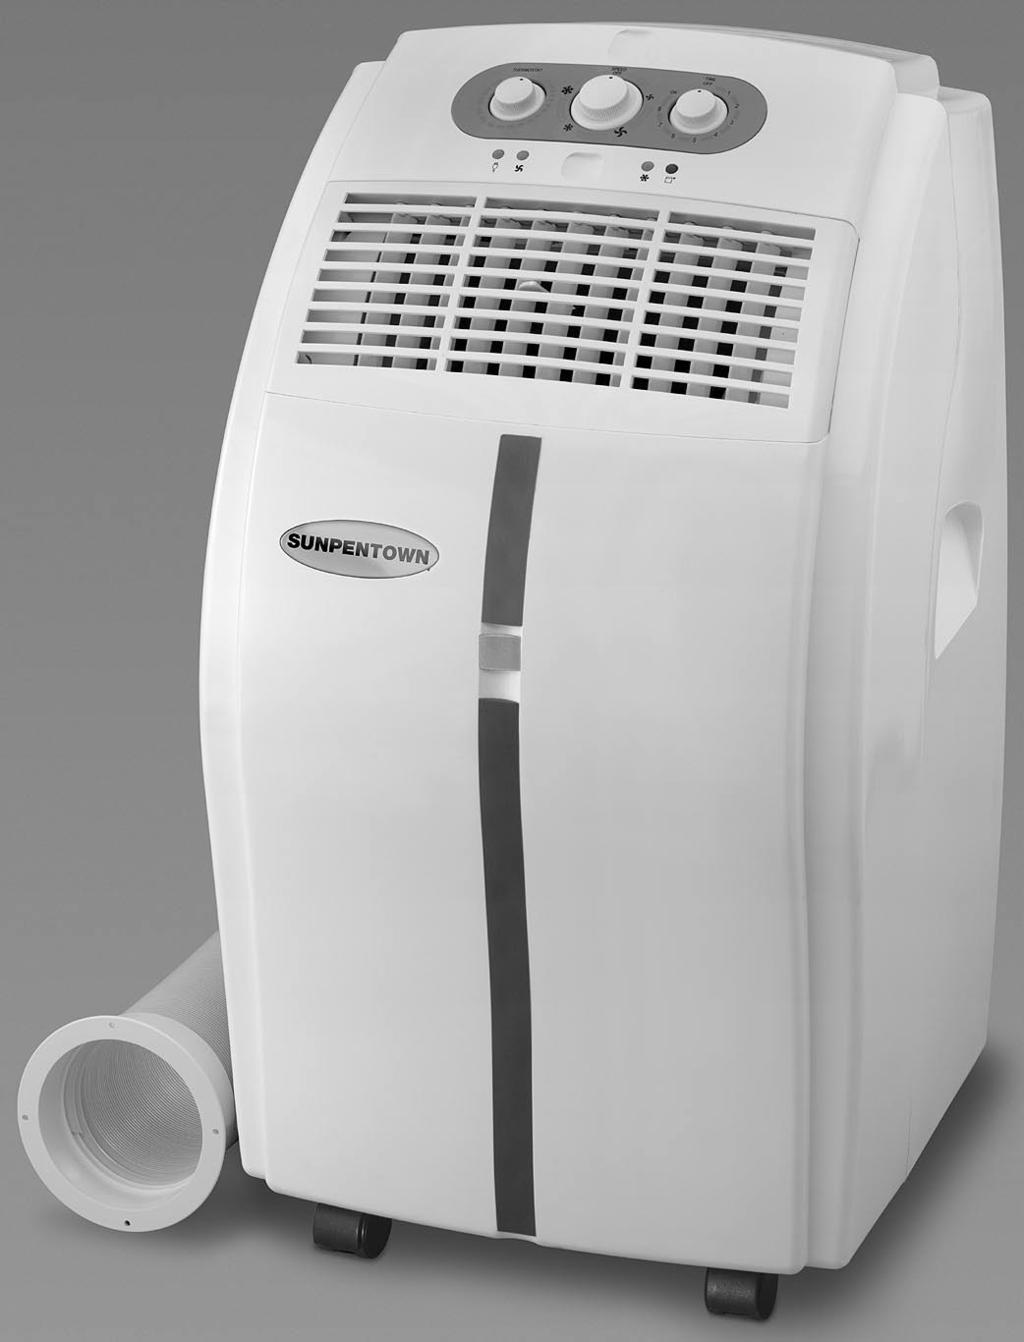 Portable Air Conditioner / Heater Your Guarantee If this product is found to be faulty as a result of faulty materials or workmanship within one year from date of purchase, it will be repaired or